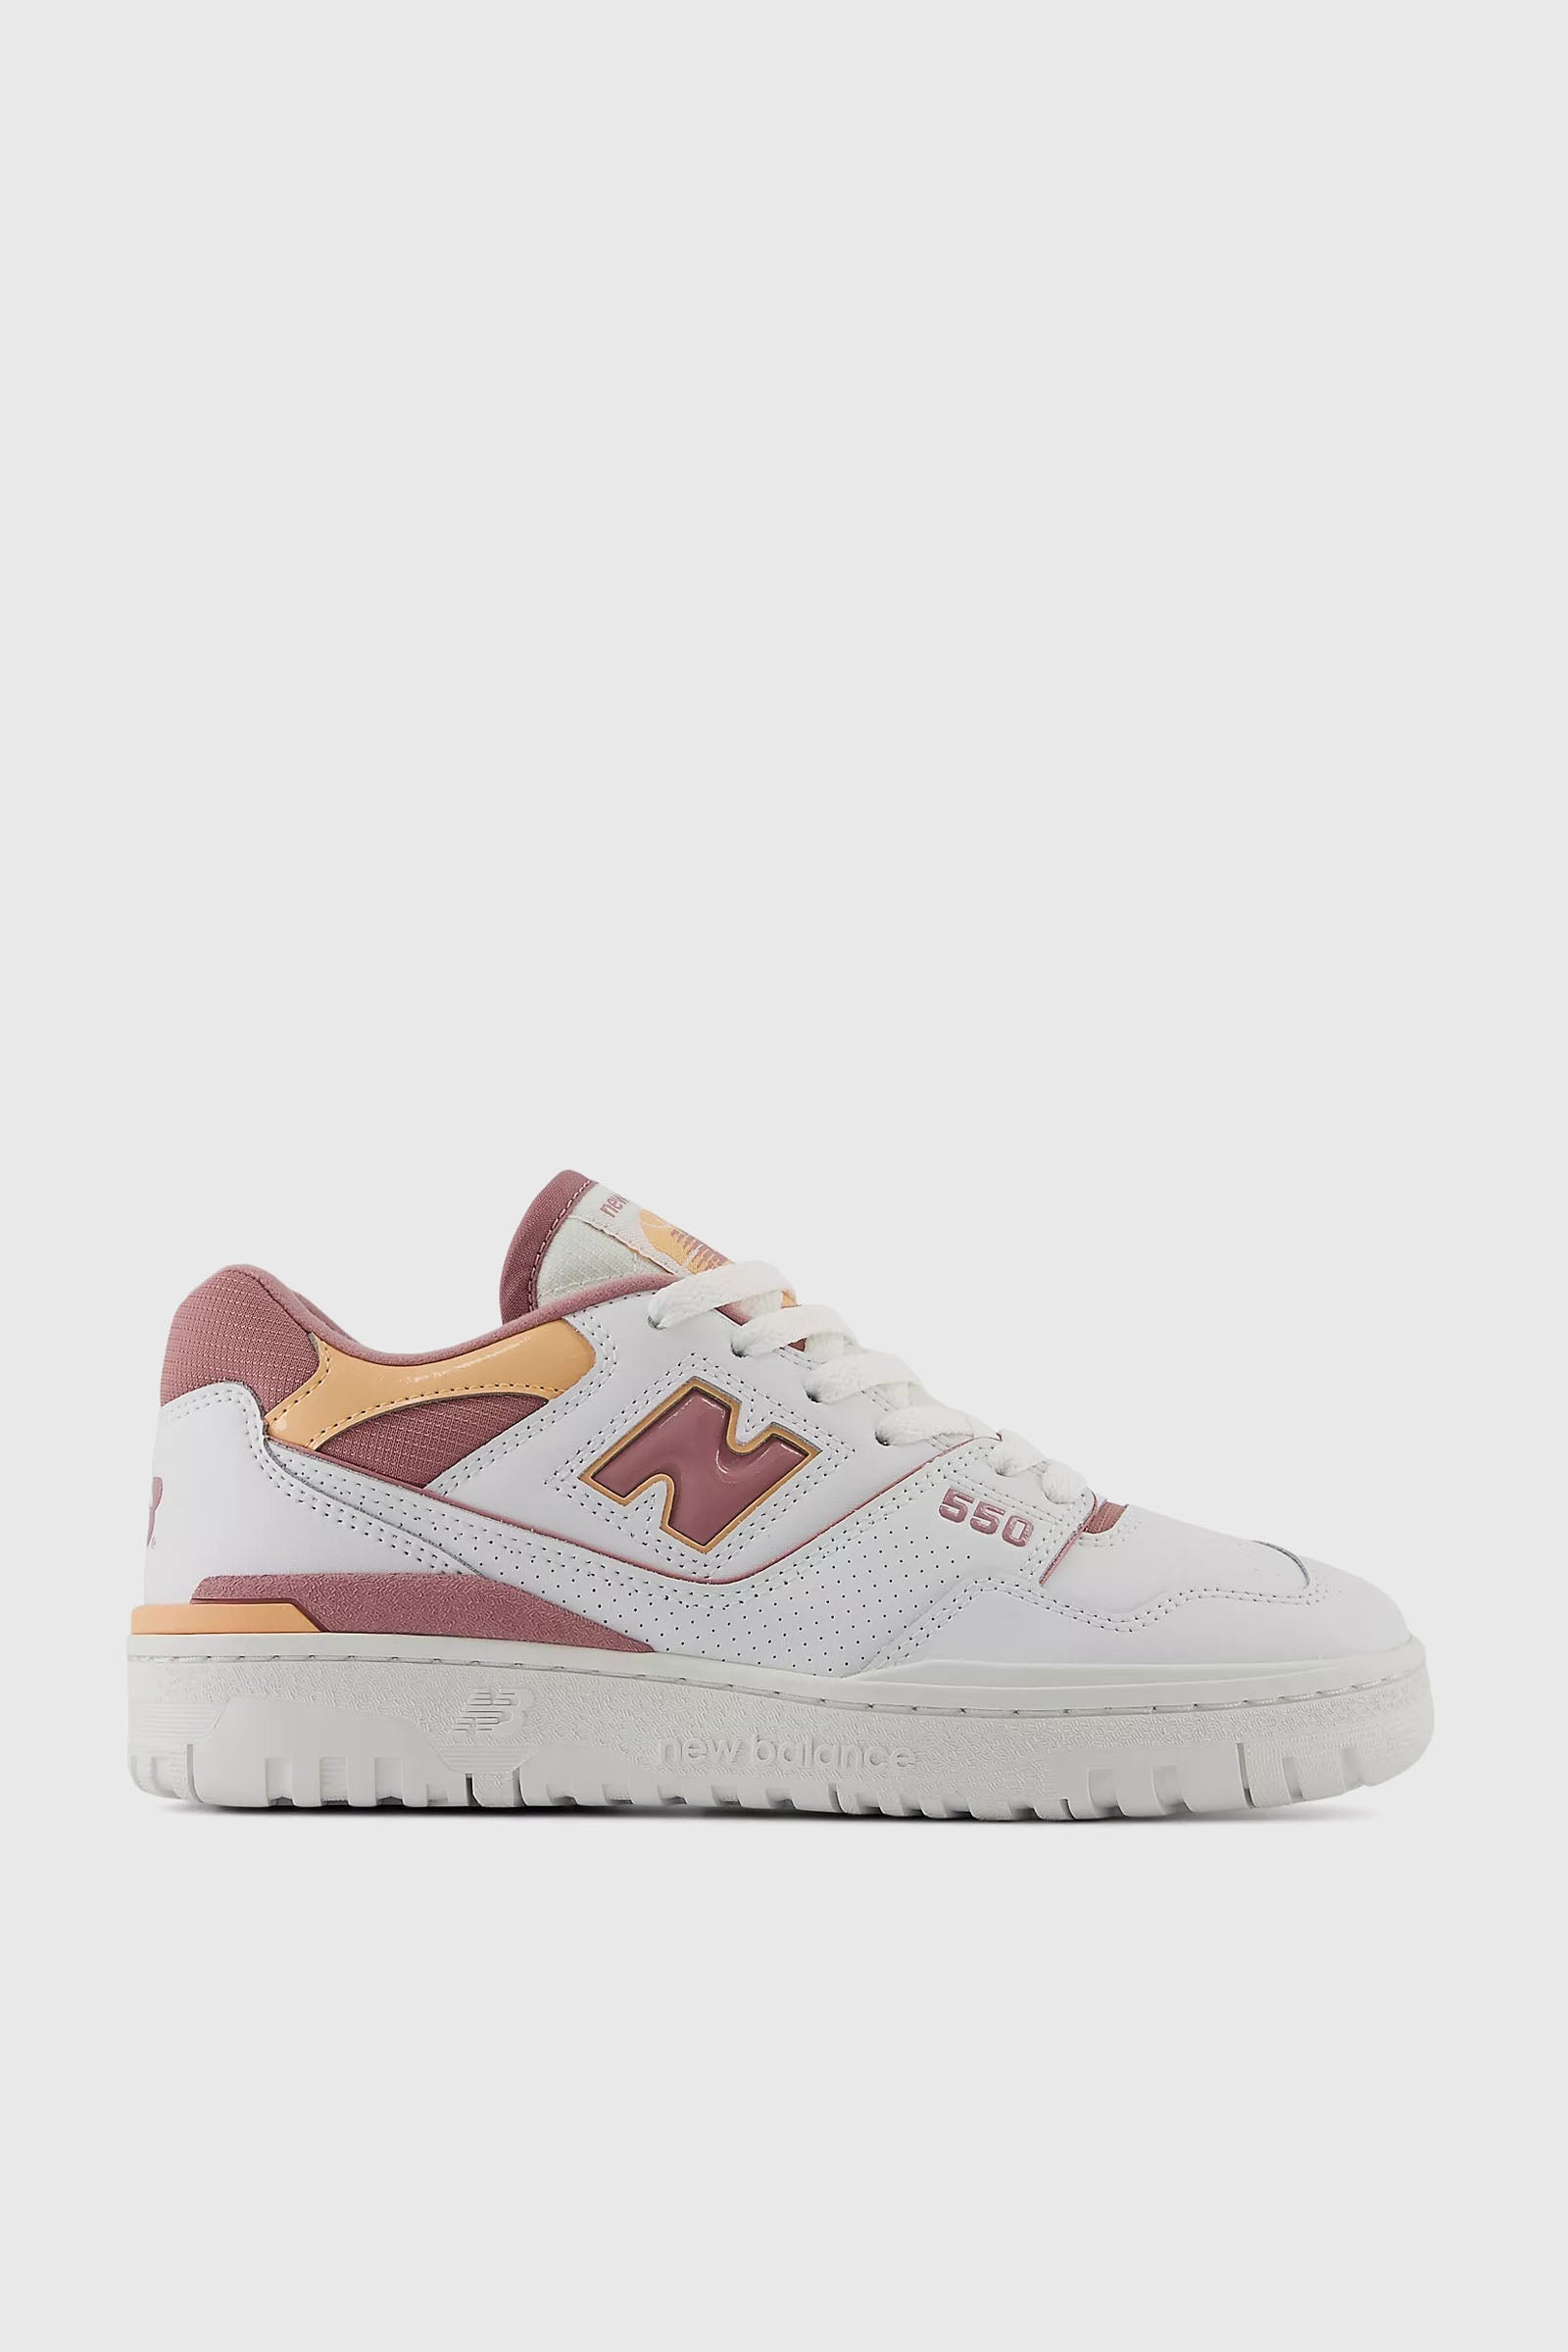 New Balance Sneaker 550 Leather White/Pink - 1